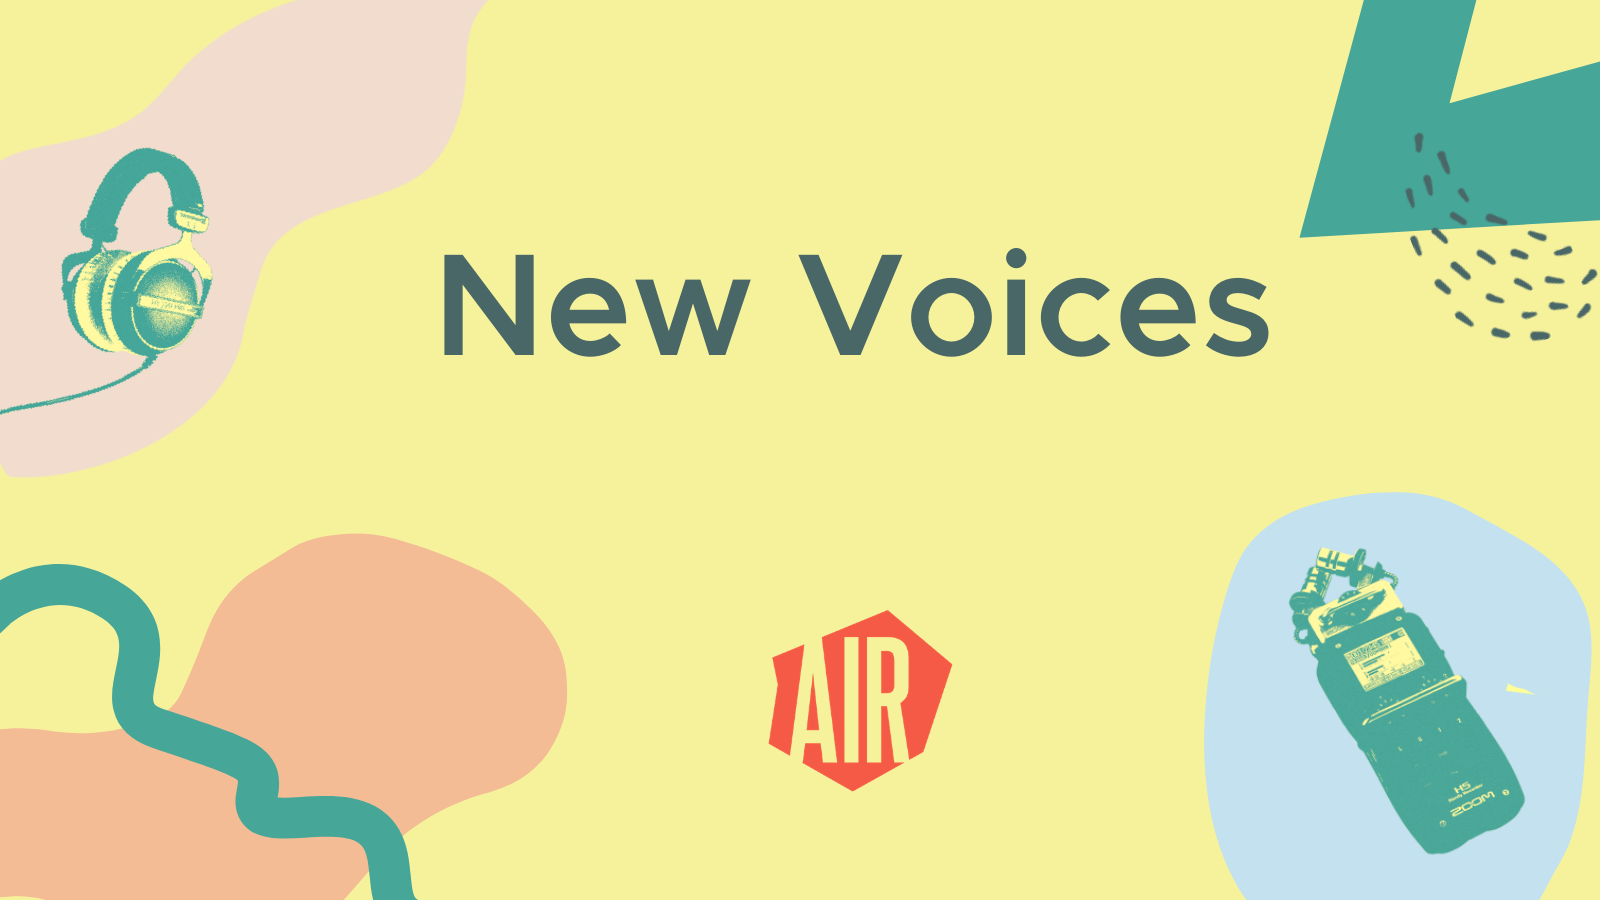 New Voices AIR